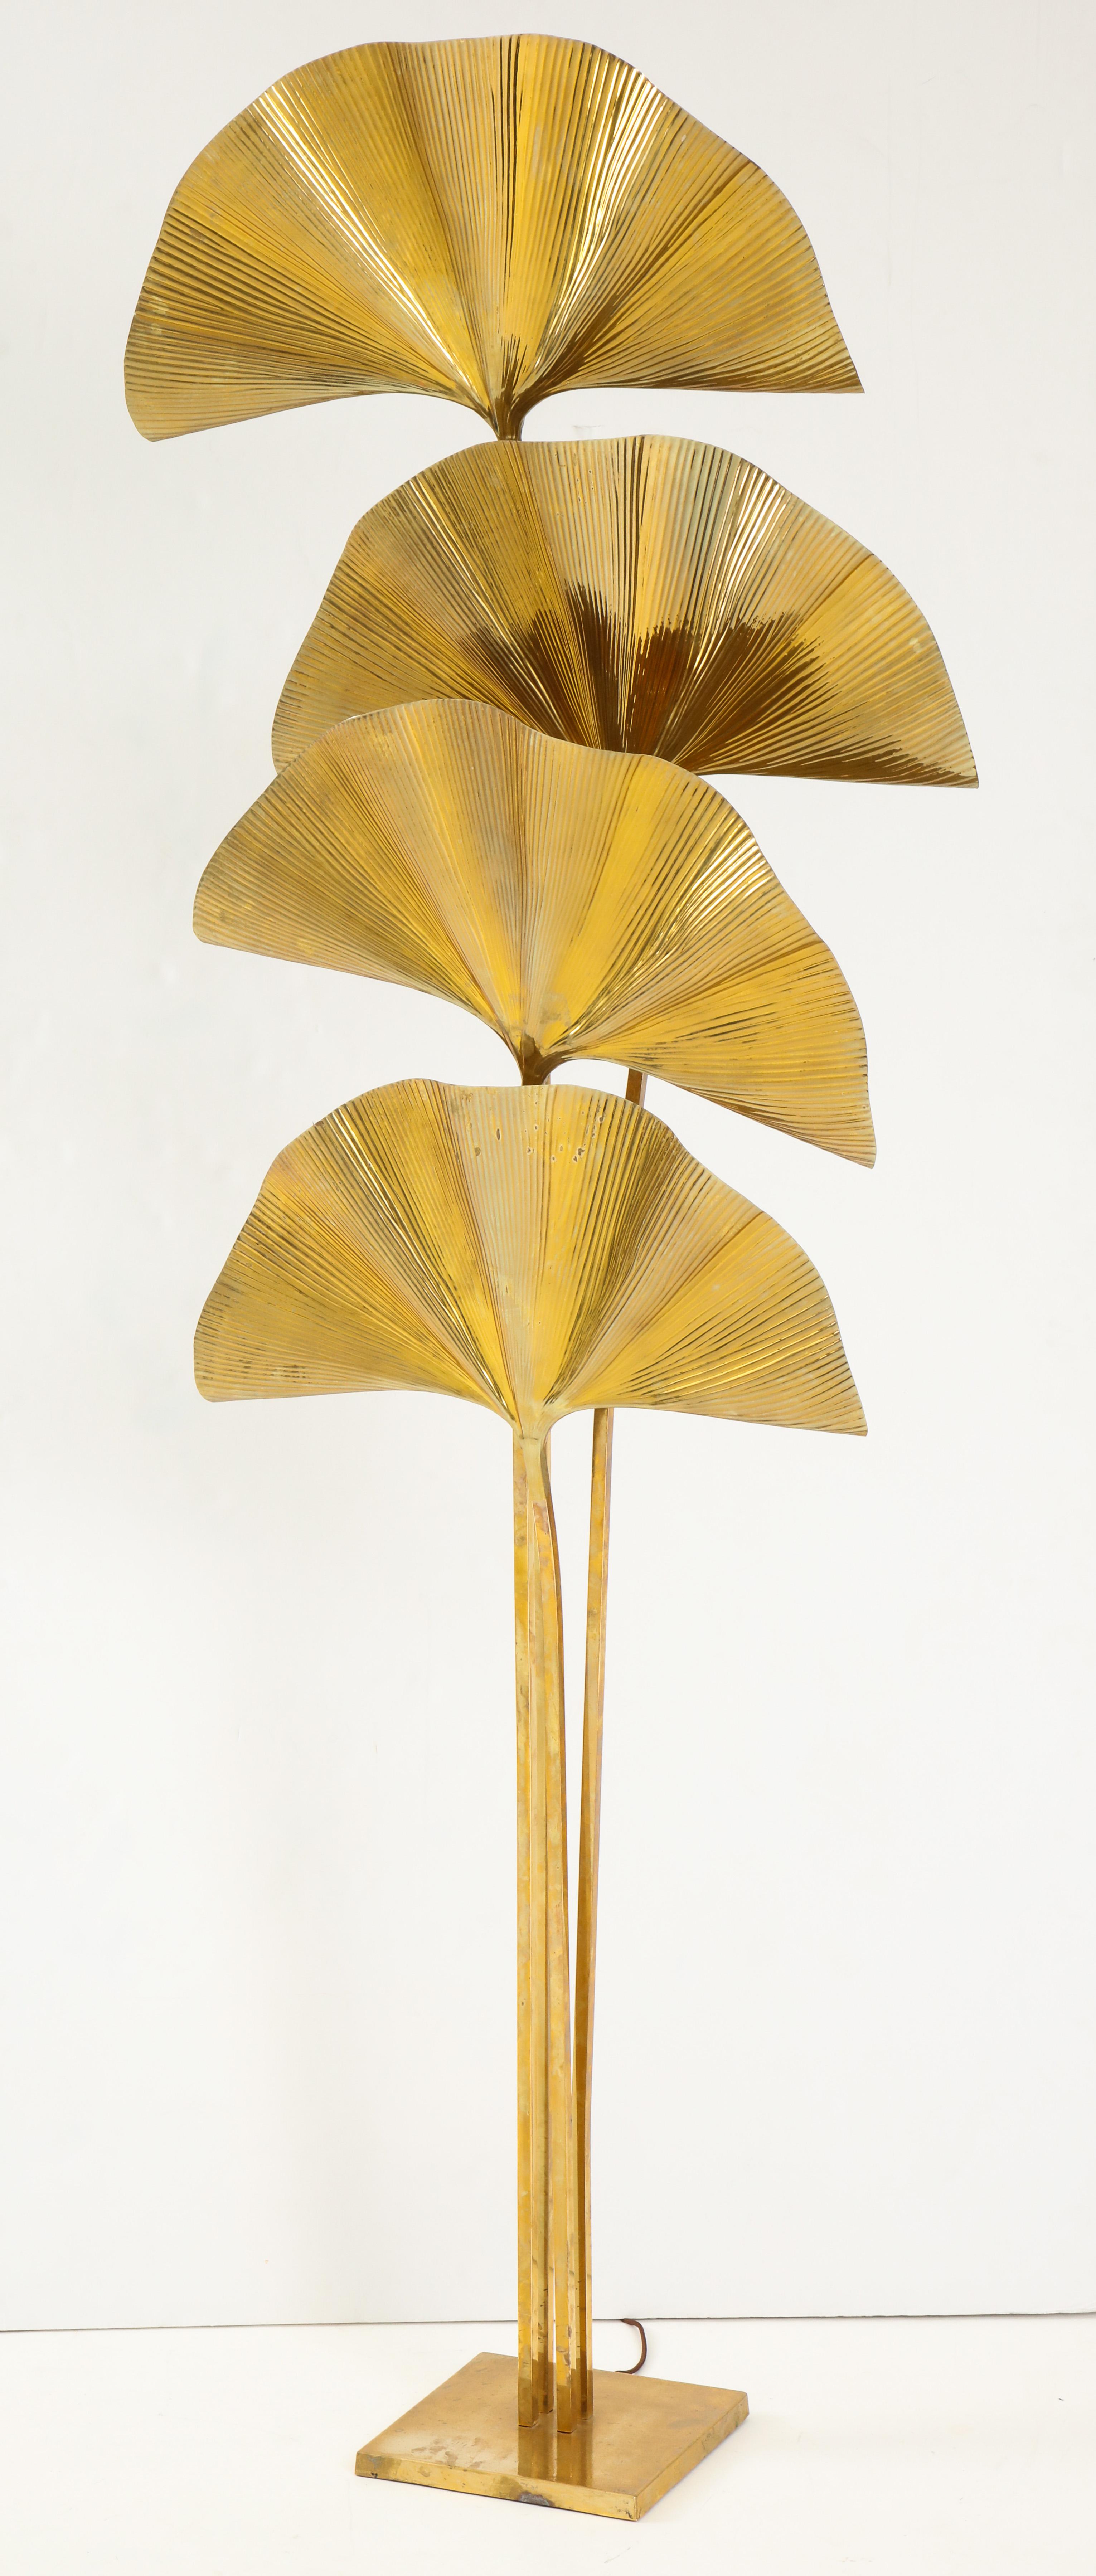 Large and elegant patinated gilt brass four-leaf ginkgo floor lamp with undulating embossed leaves, handmade using repoussé and chasing techniques, mounted on stems attached to square base, Italy, 1970s. This original Bottega Gadda floor lamp ginkgo